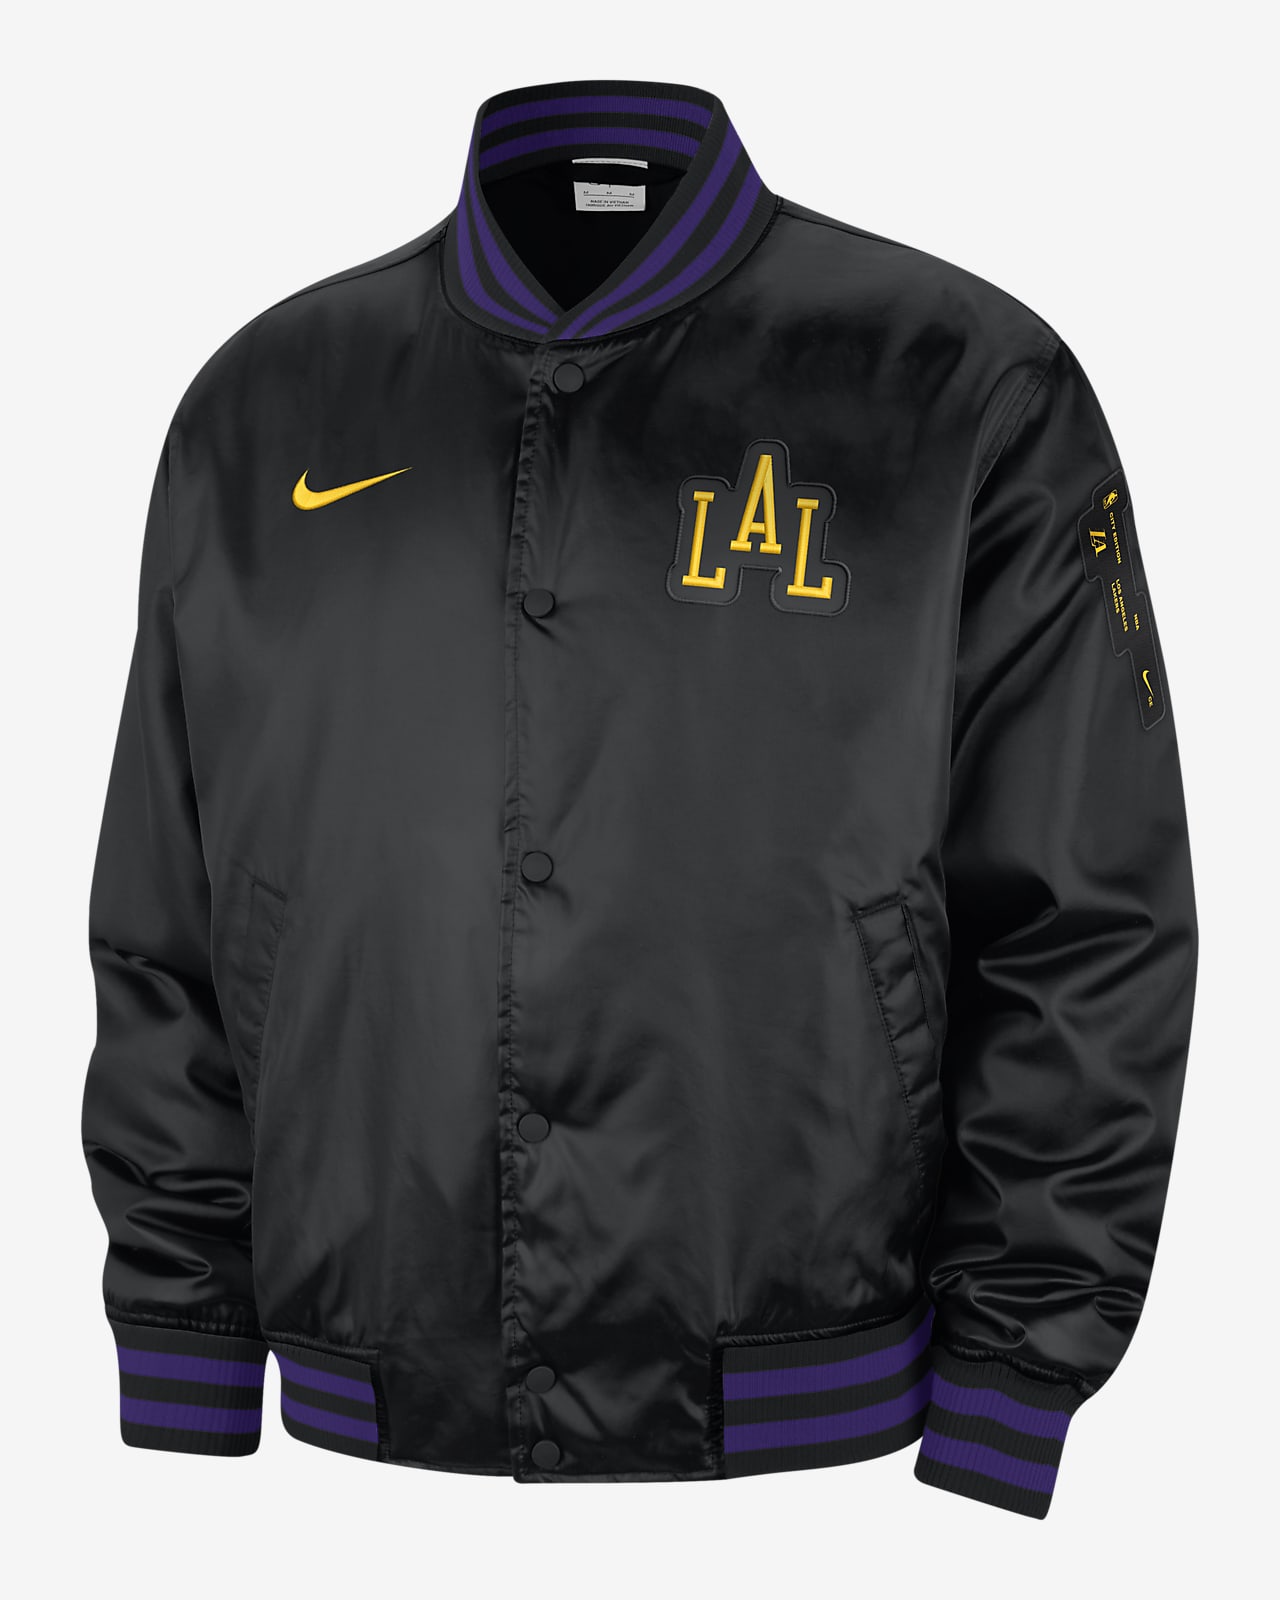 https://static.nike.com/a/images/t_PDP_1280_v1/f_auto,q_auto:eco/cfadaa94-ec2a-4c45-81a5-7cdb7d0b62fe/casaco-nba-los-angeles-lakers-2023-24-city-edition-m2mSD8.png